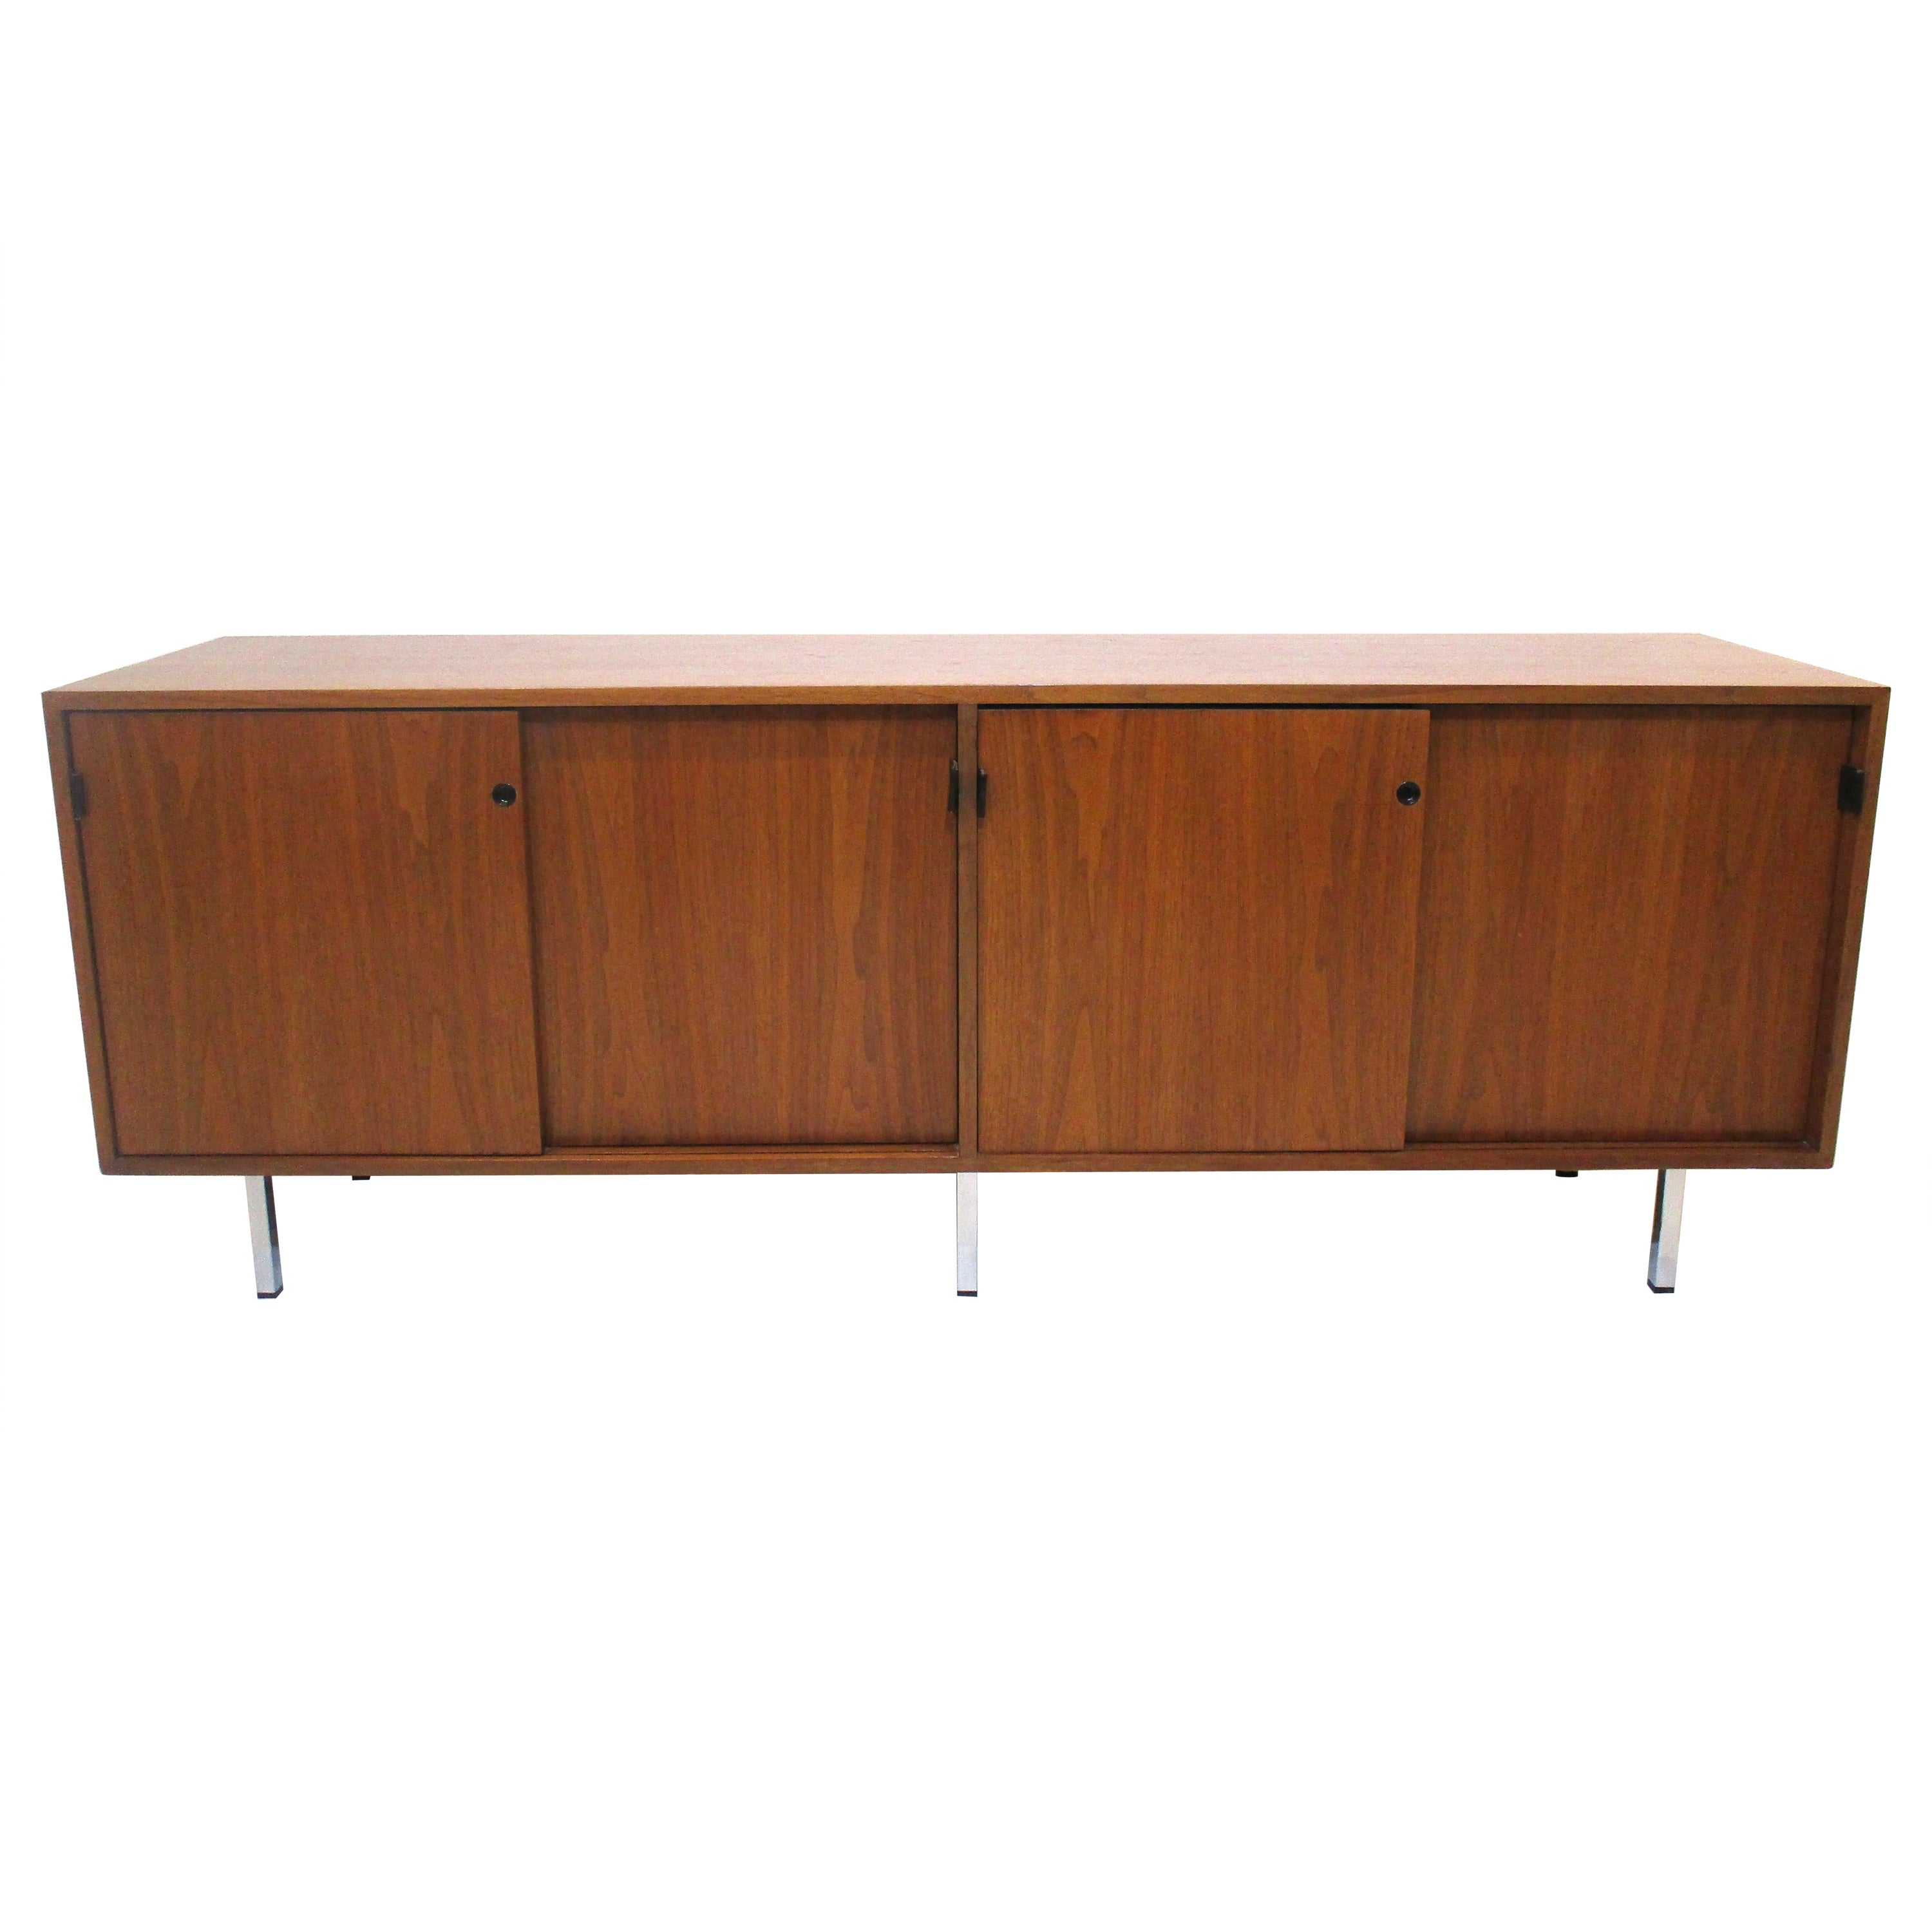 Florence Knoll Walnut Credenza / Sideboard for Knoll